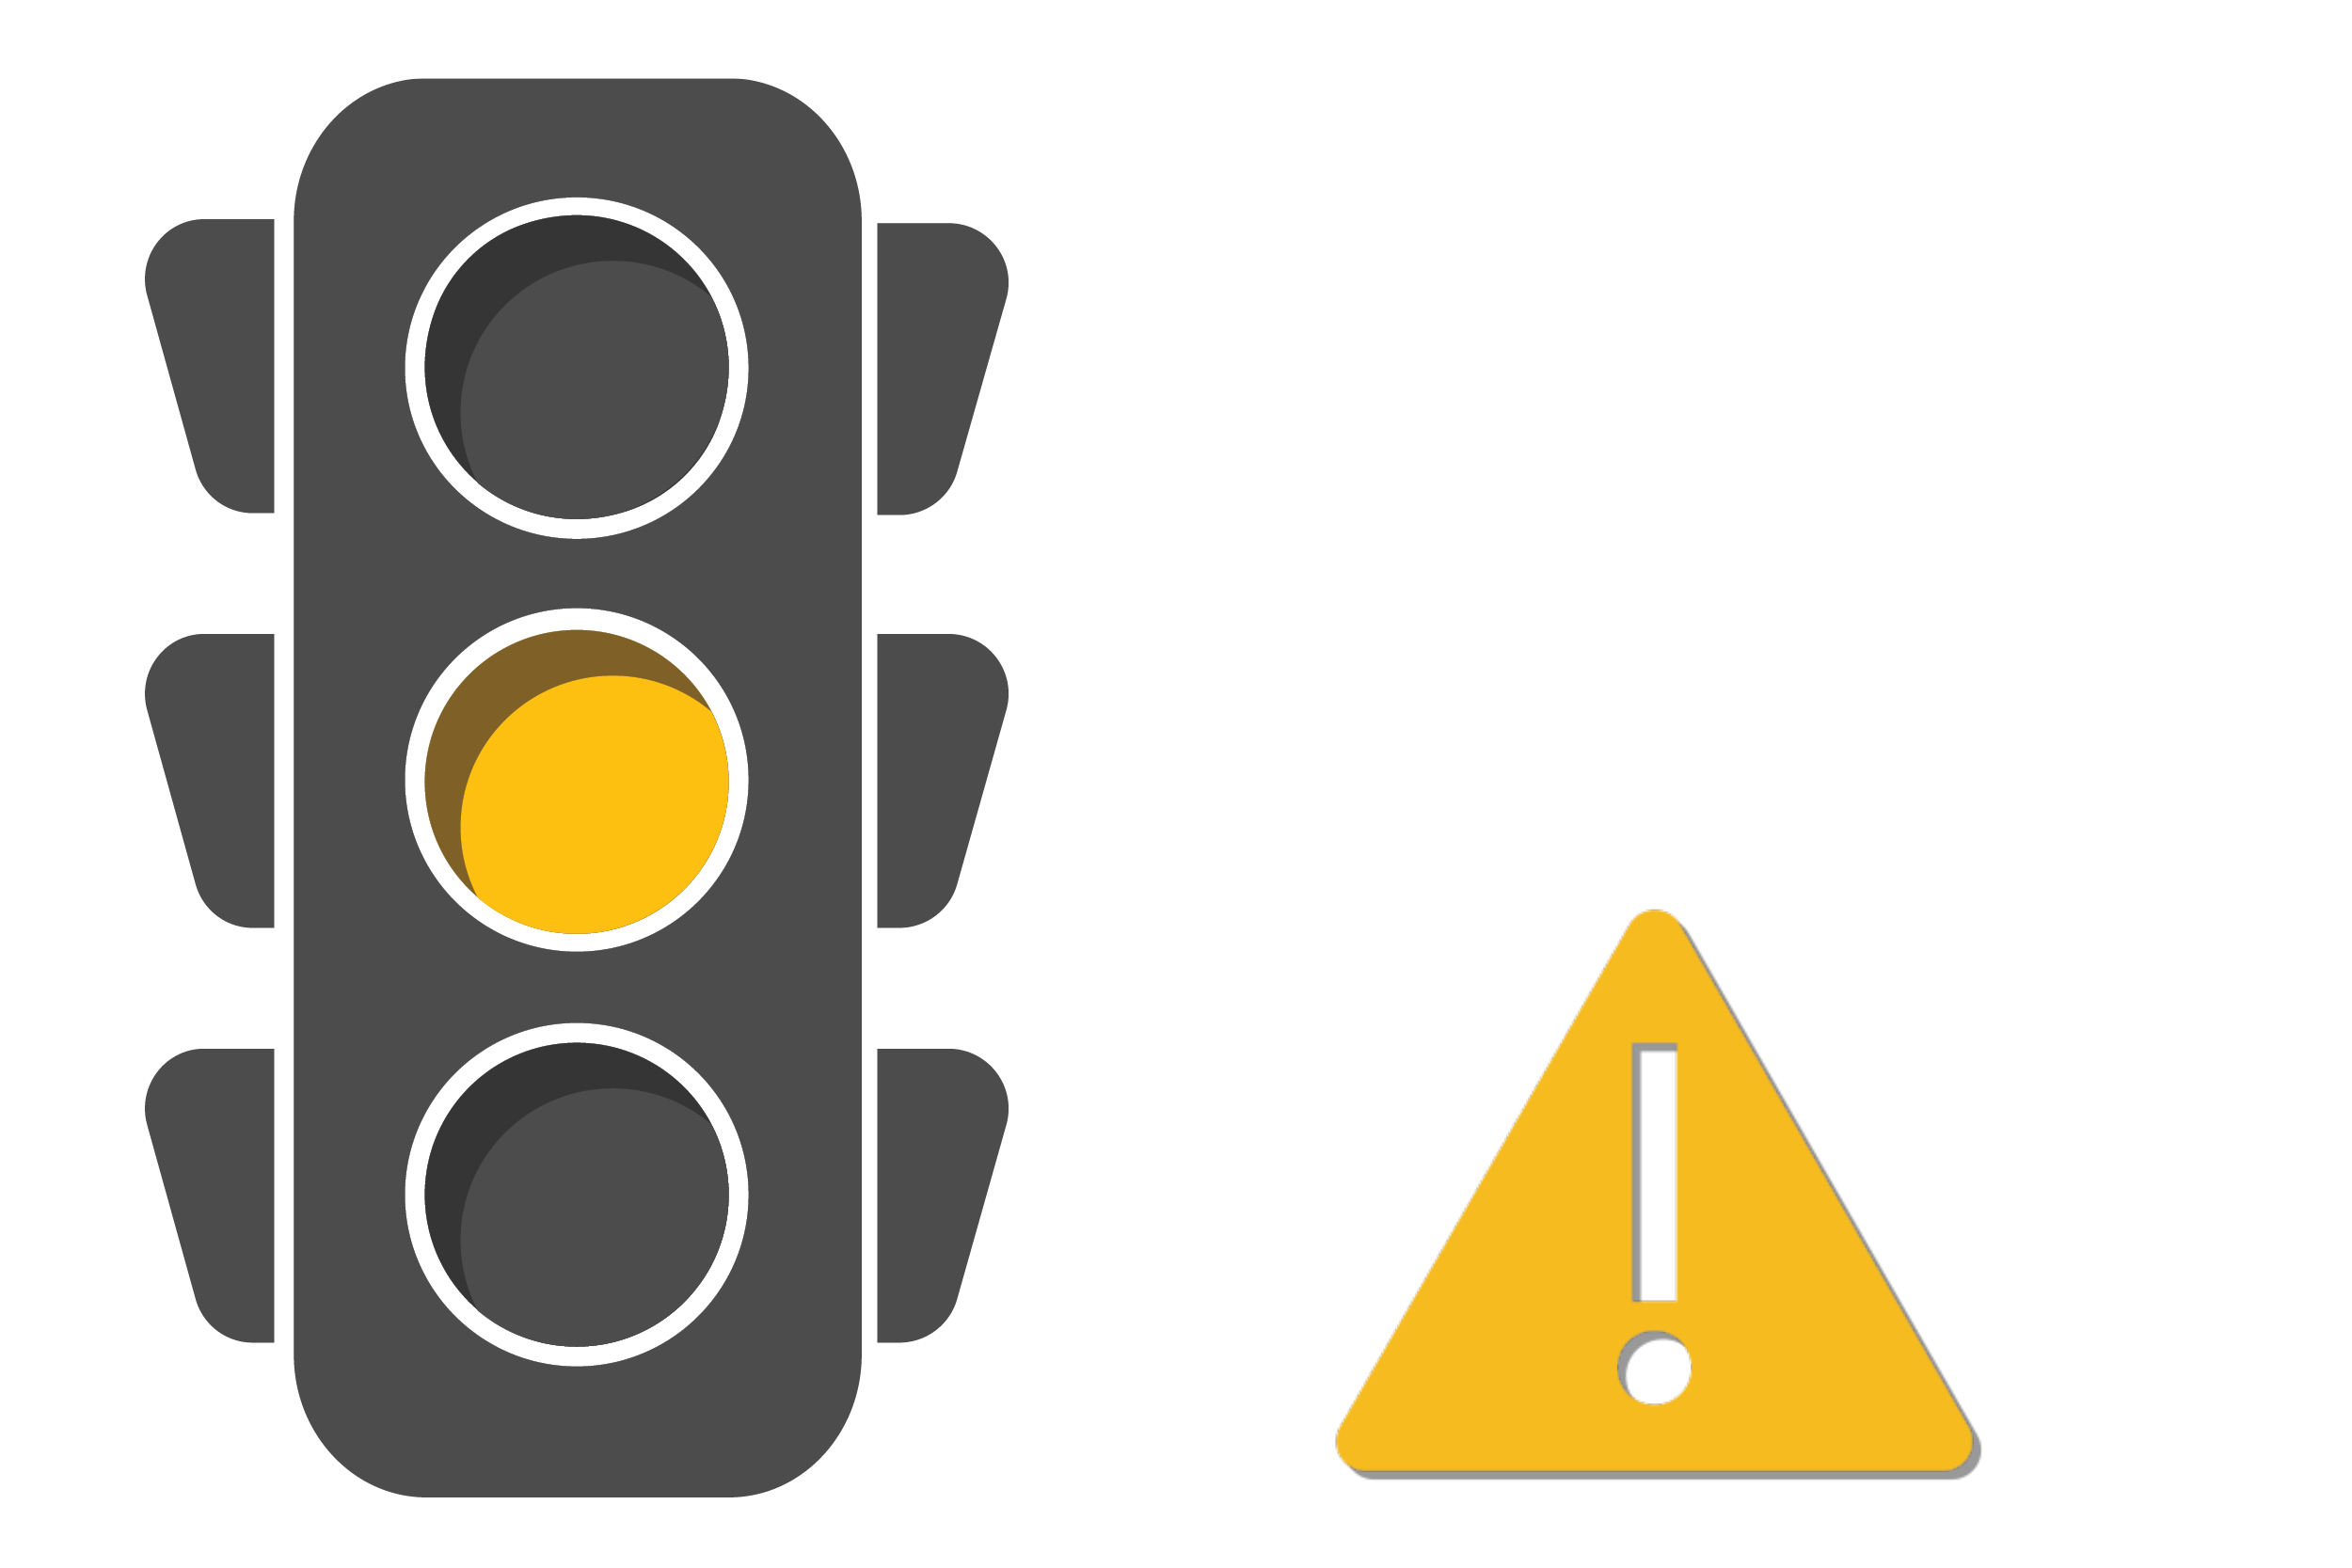 Stop light with yellow light